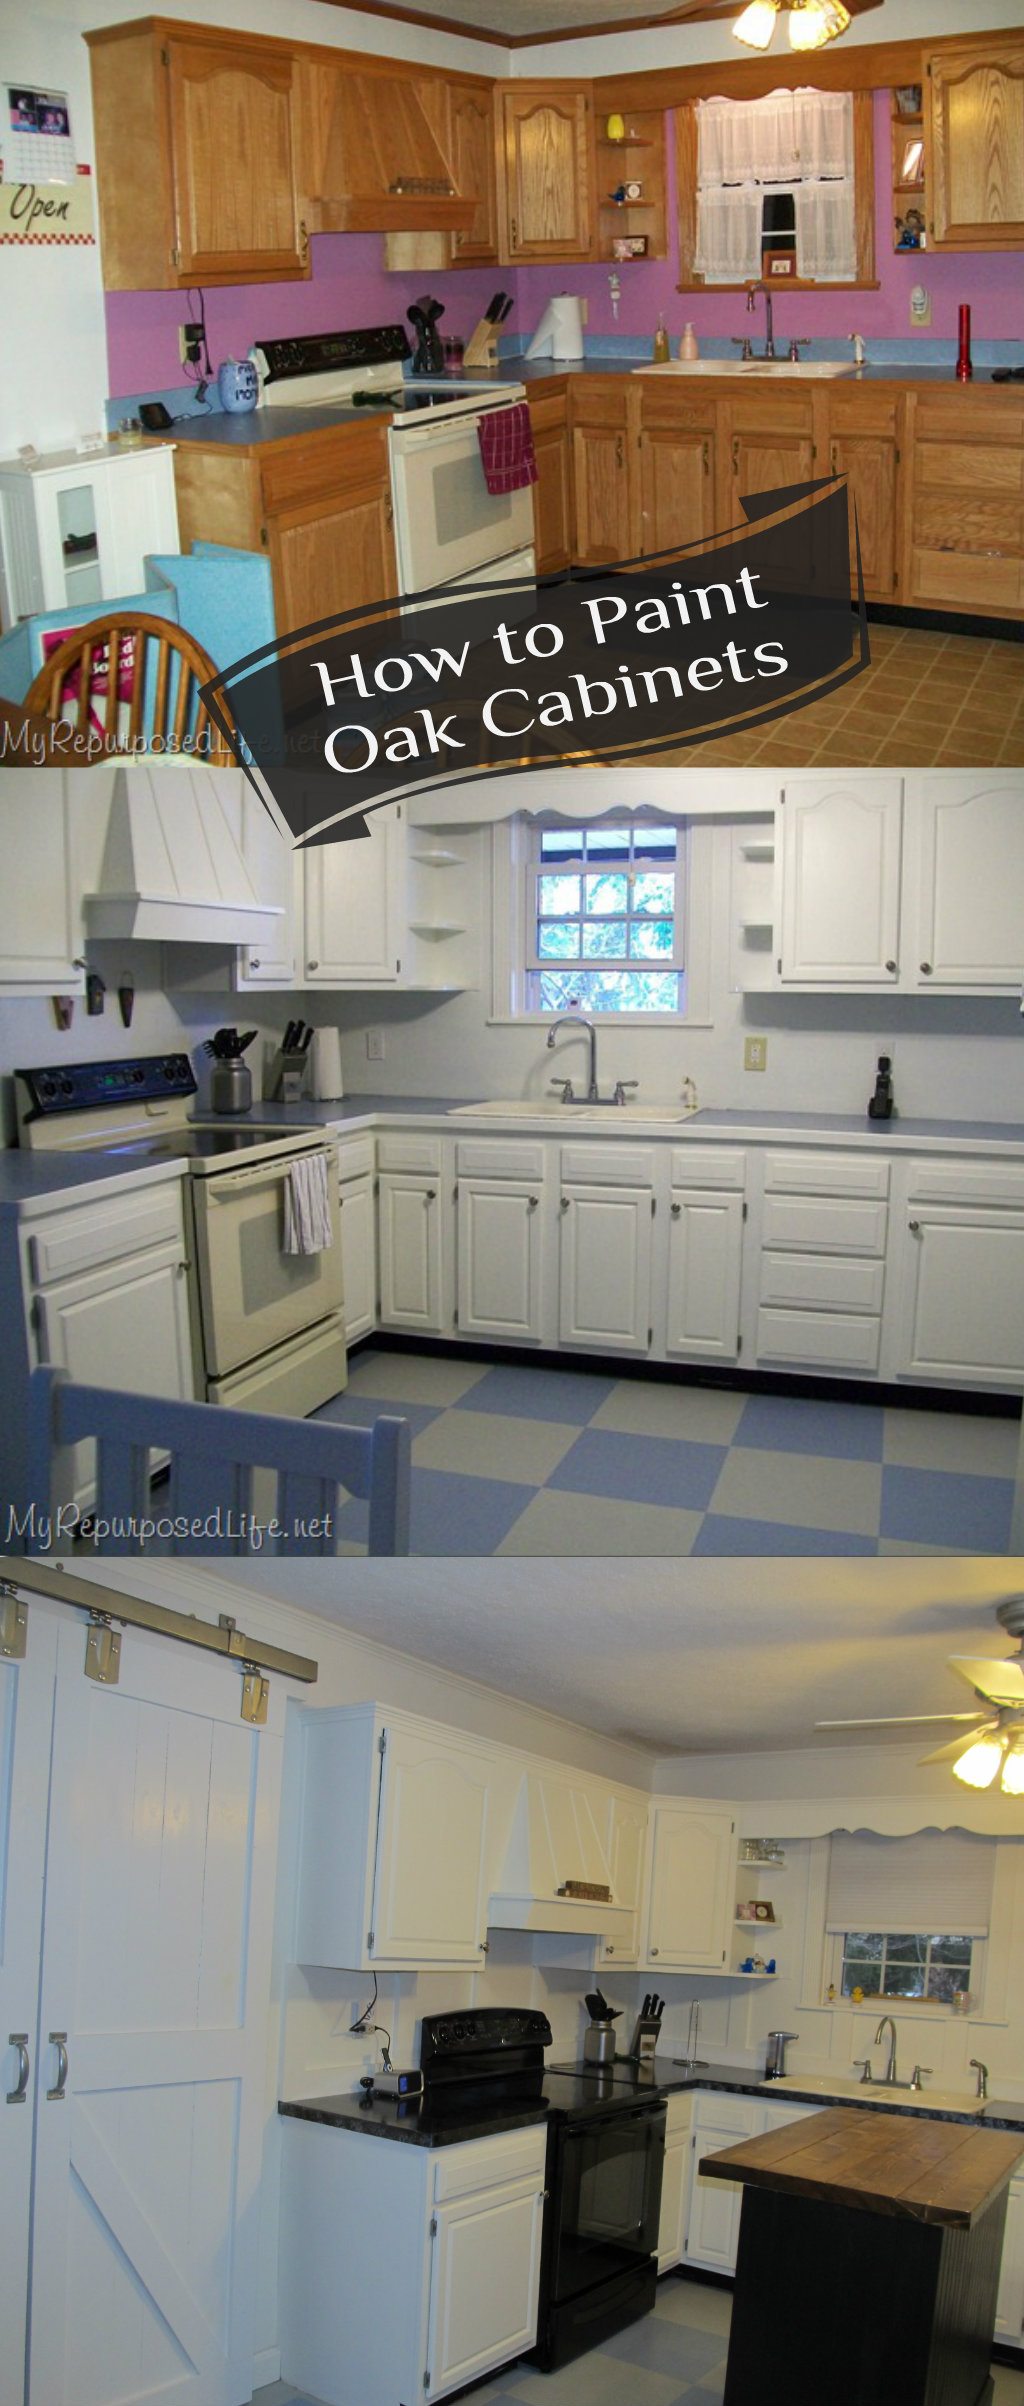 How to paint oak cabinets  My Repurposed Life®